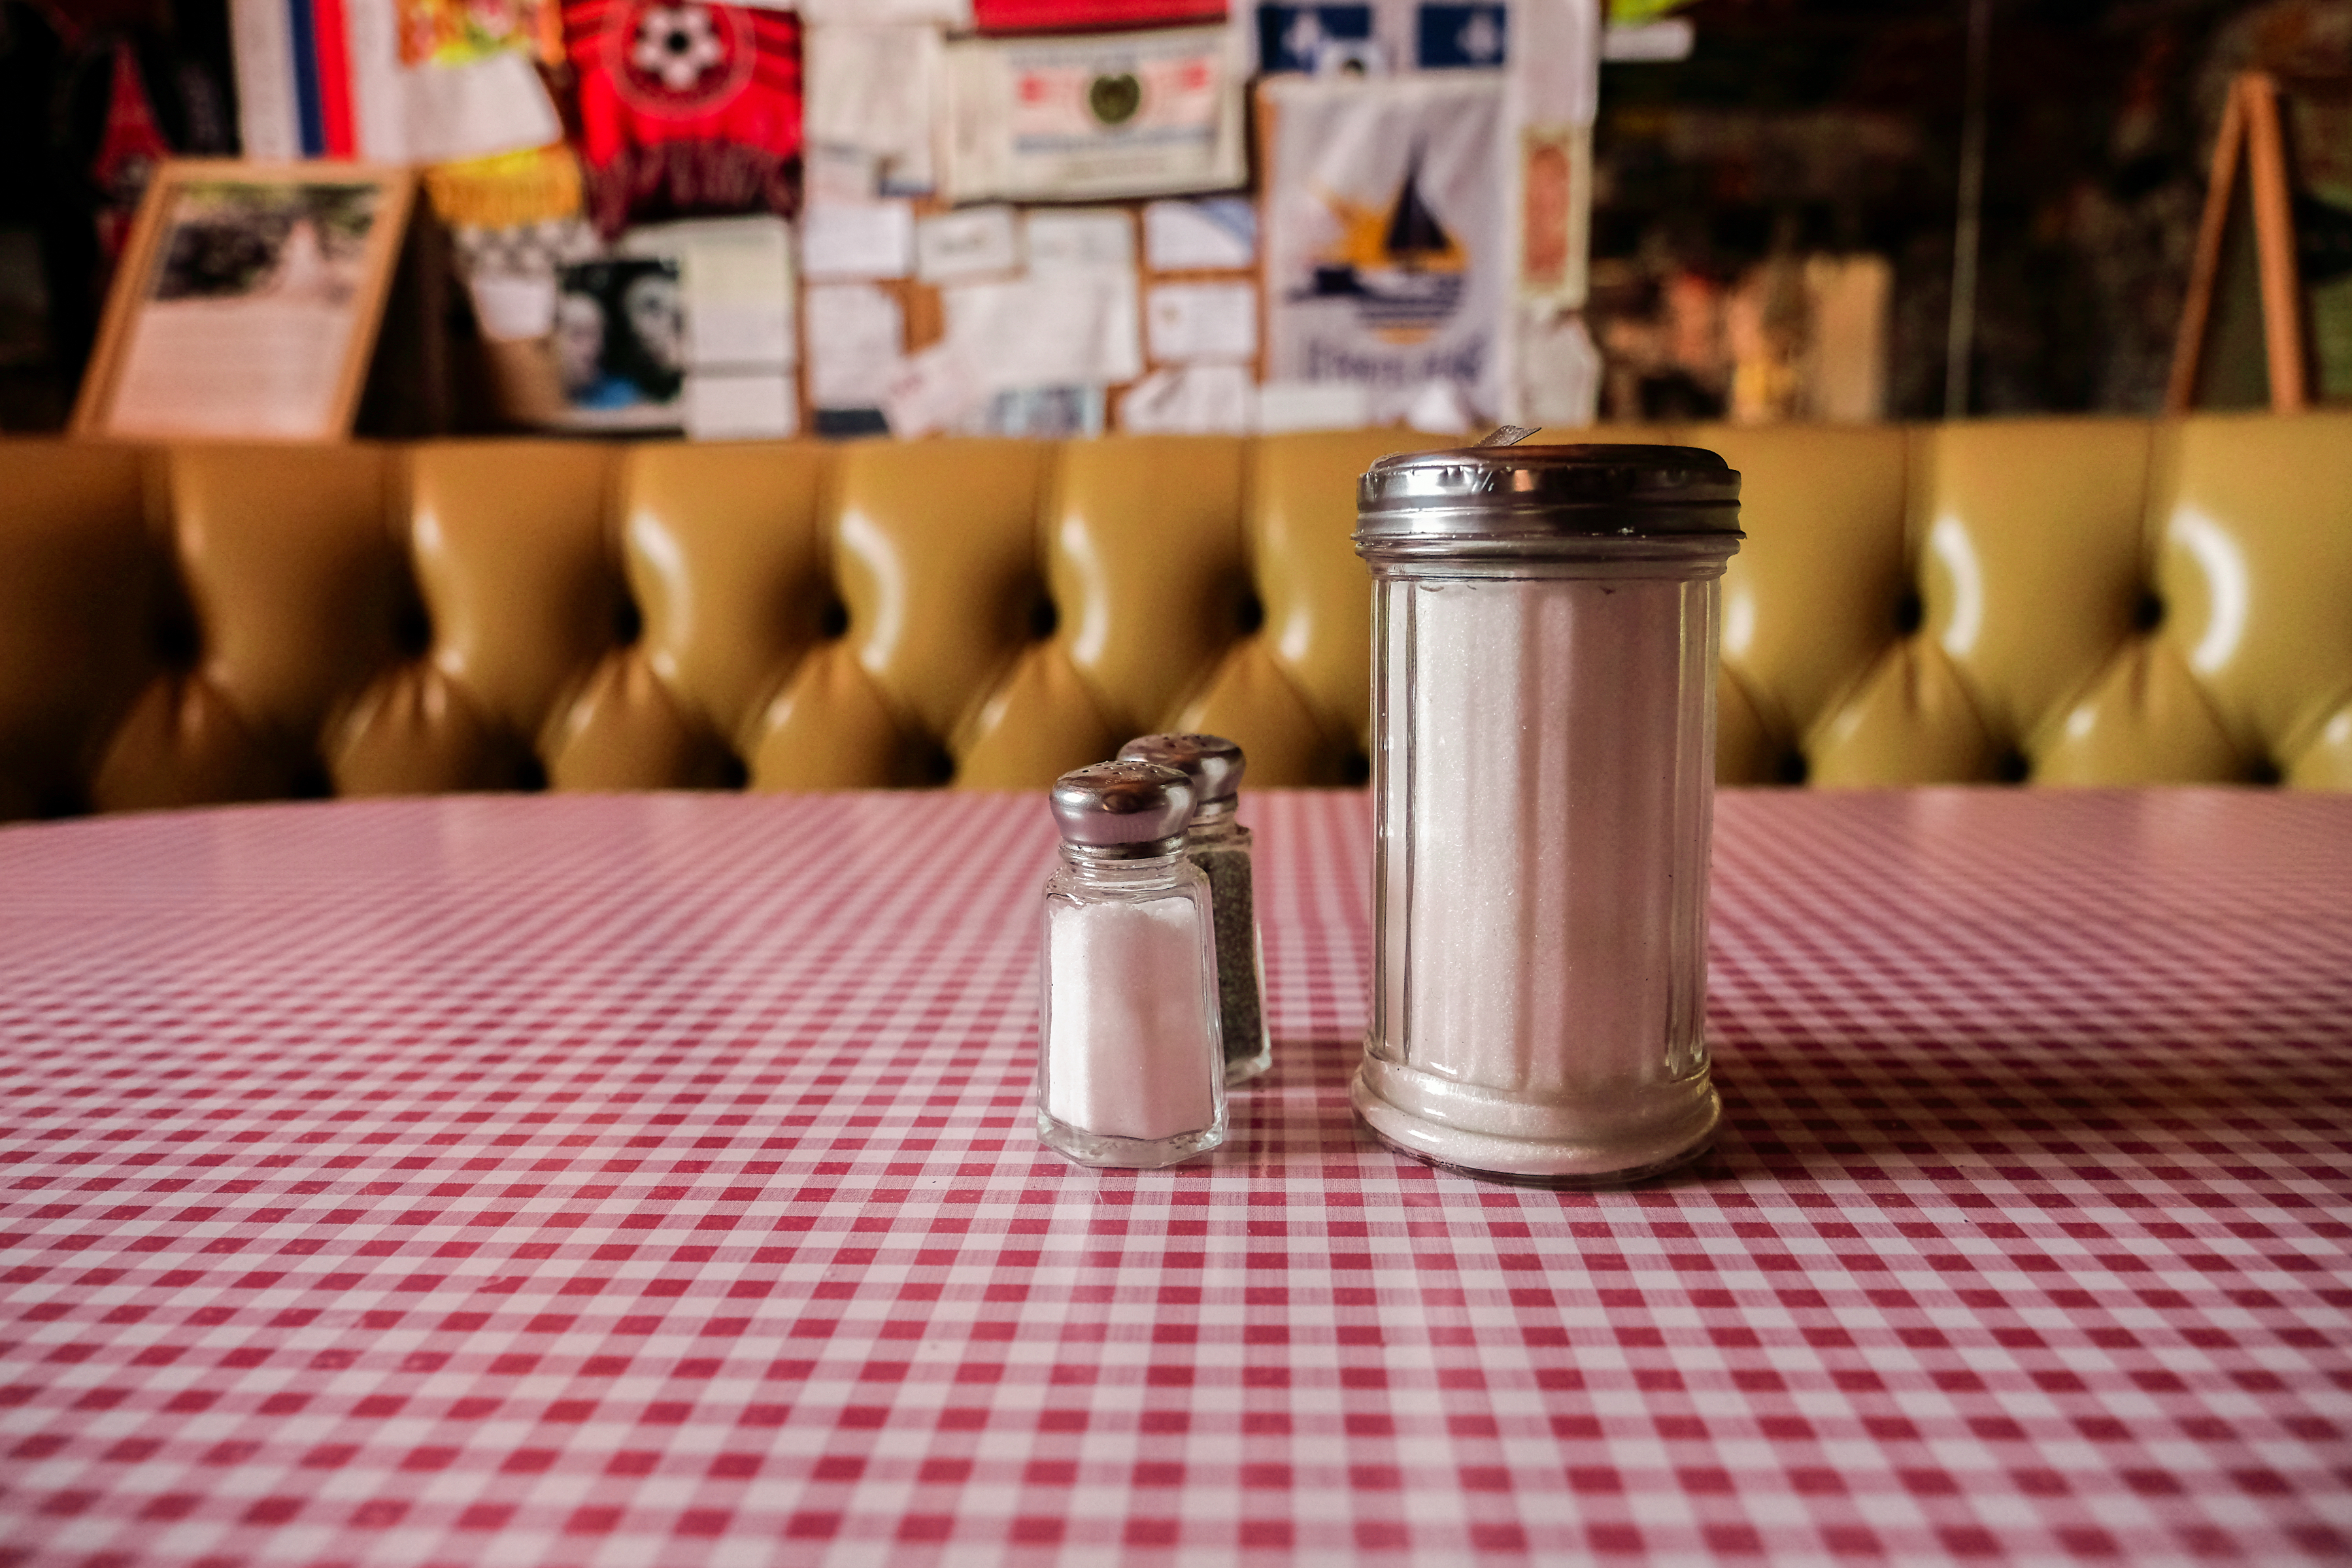 Salt shaker and sugar dispenser on a checkered tablecloth in a diner setting